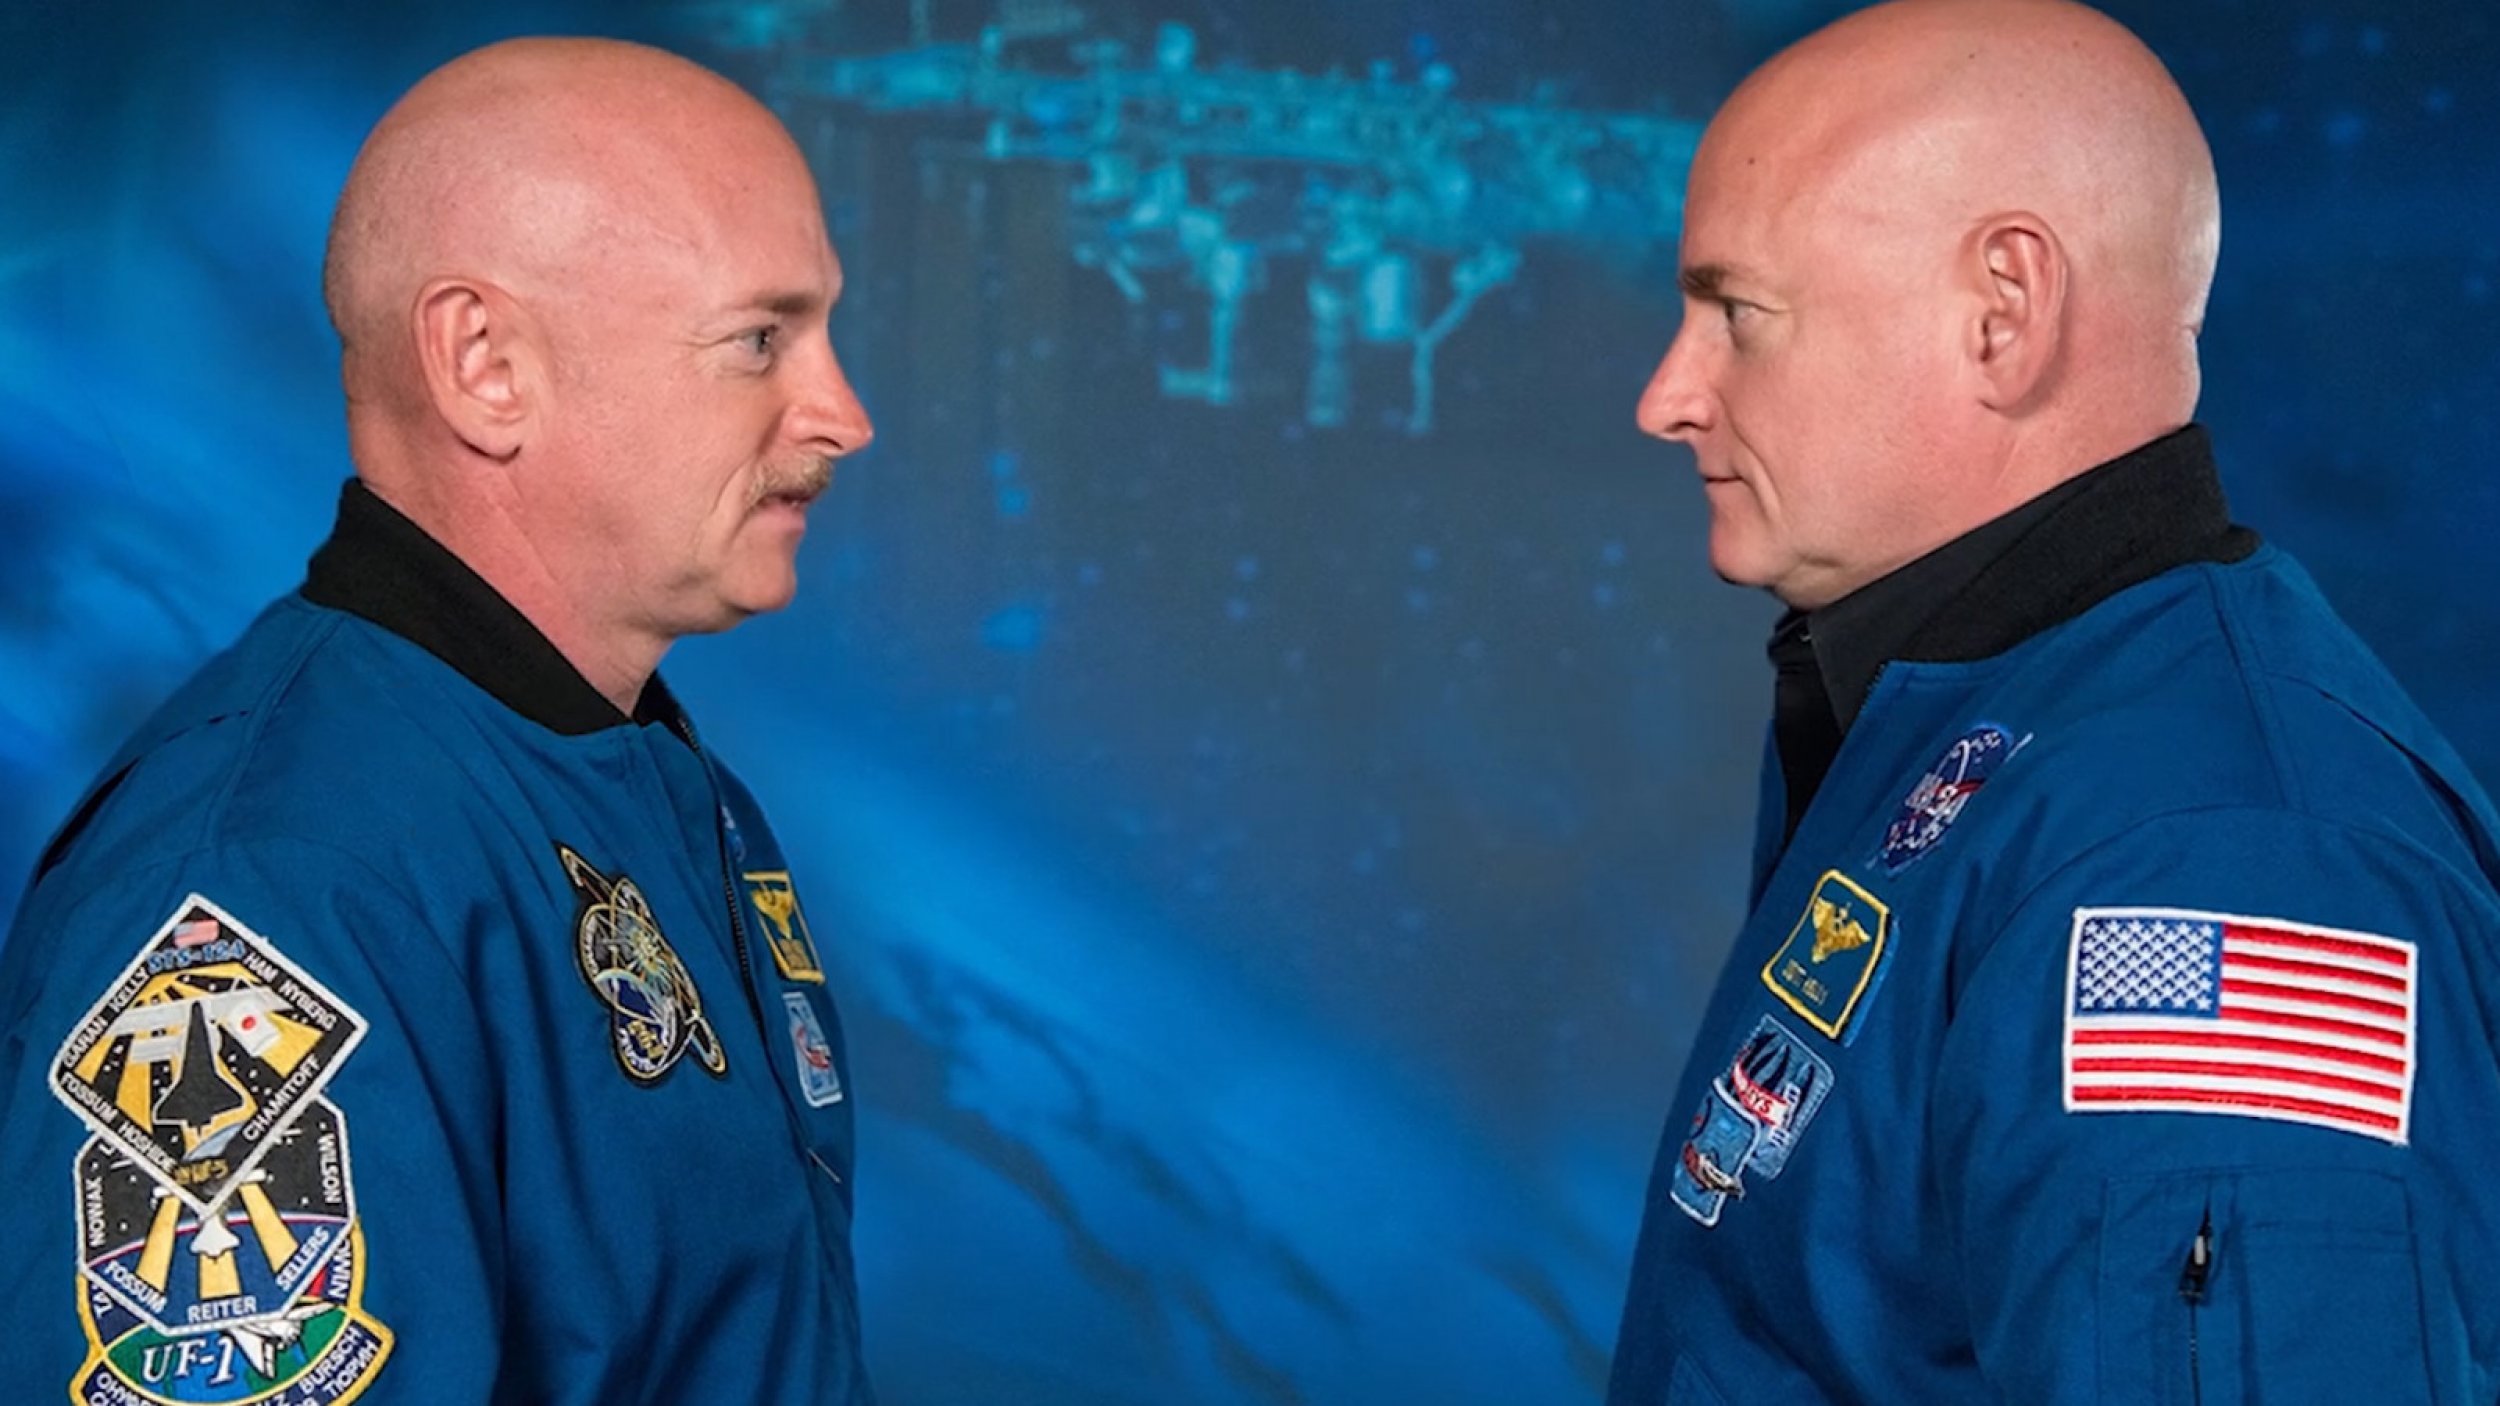 NASA Twin Study Offers New Insight On How The Human Body Responds To Spaceflight